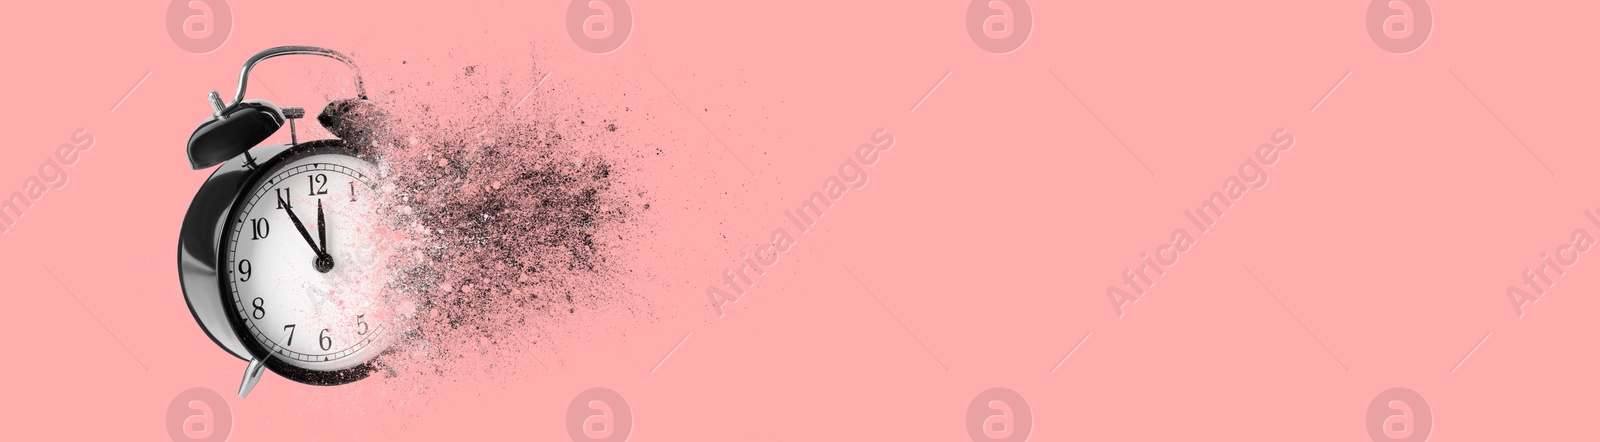 Image of Black alarm clock dissolving on pink background, banner design with space for text. Flow of time